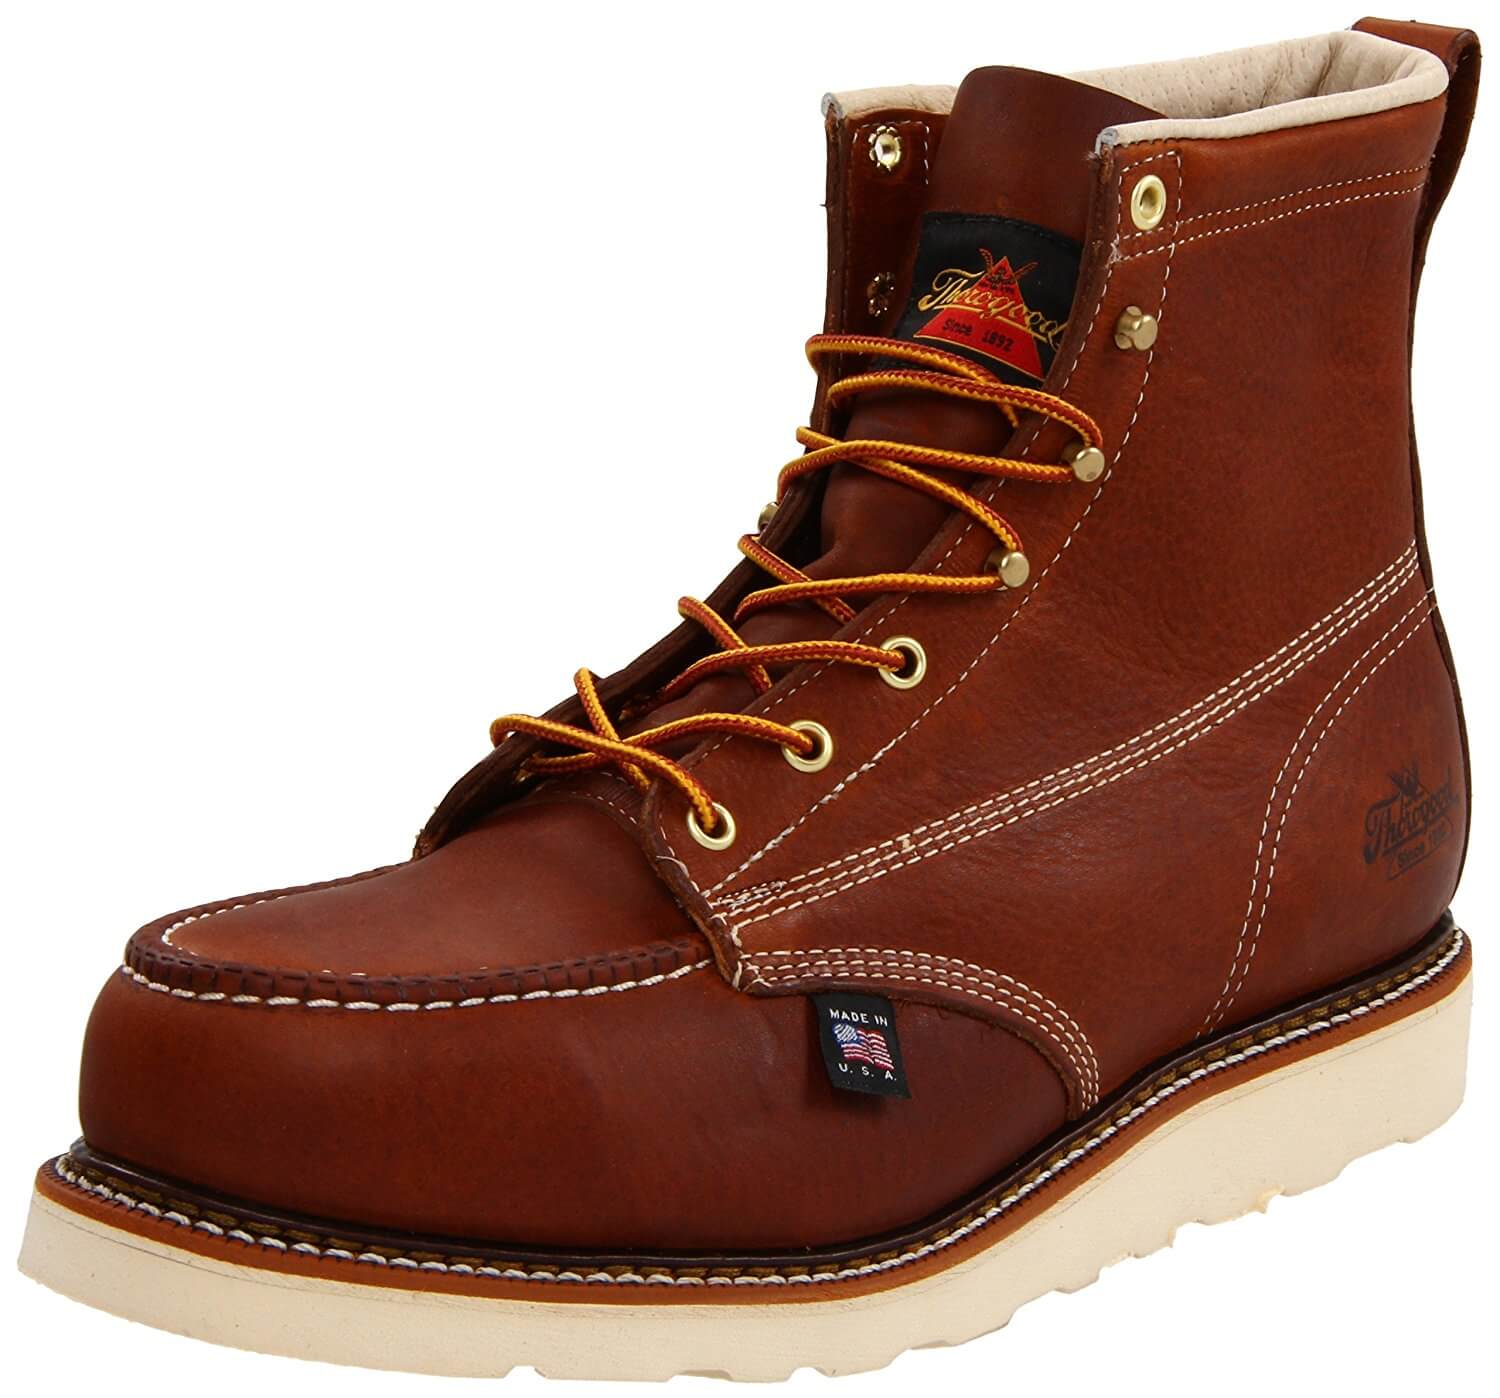 thorogood boots for men to wear for work